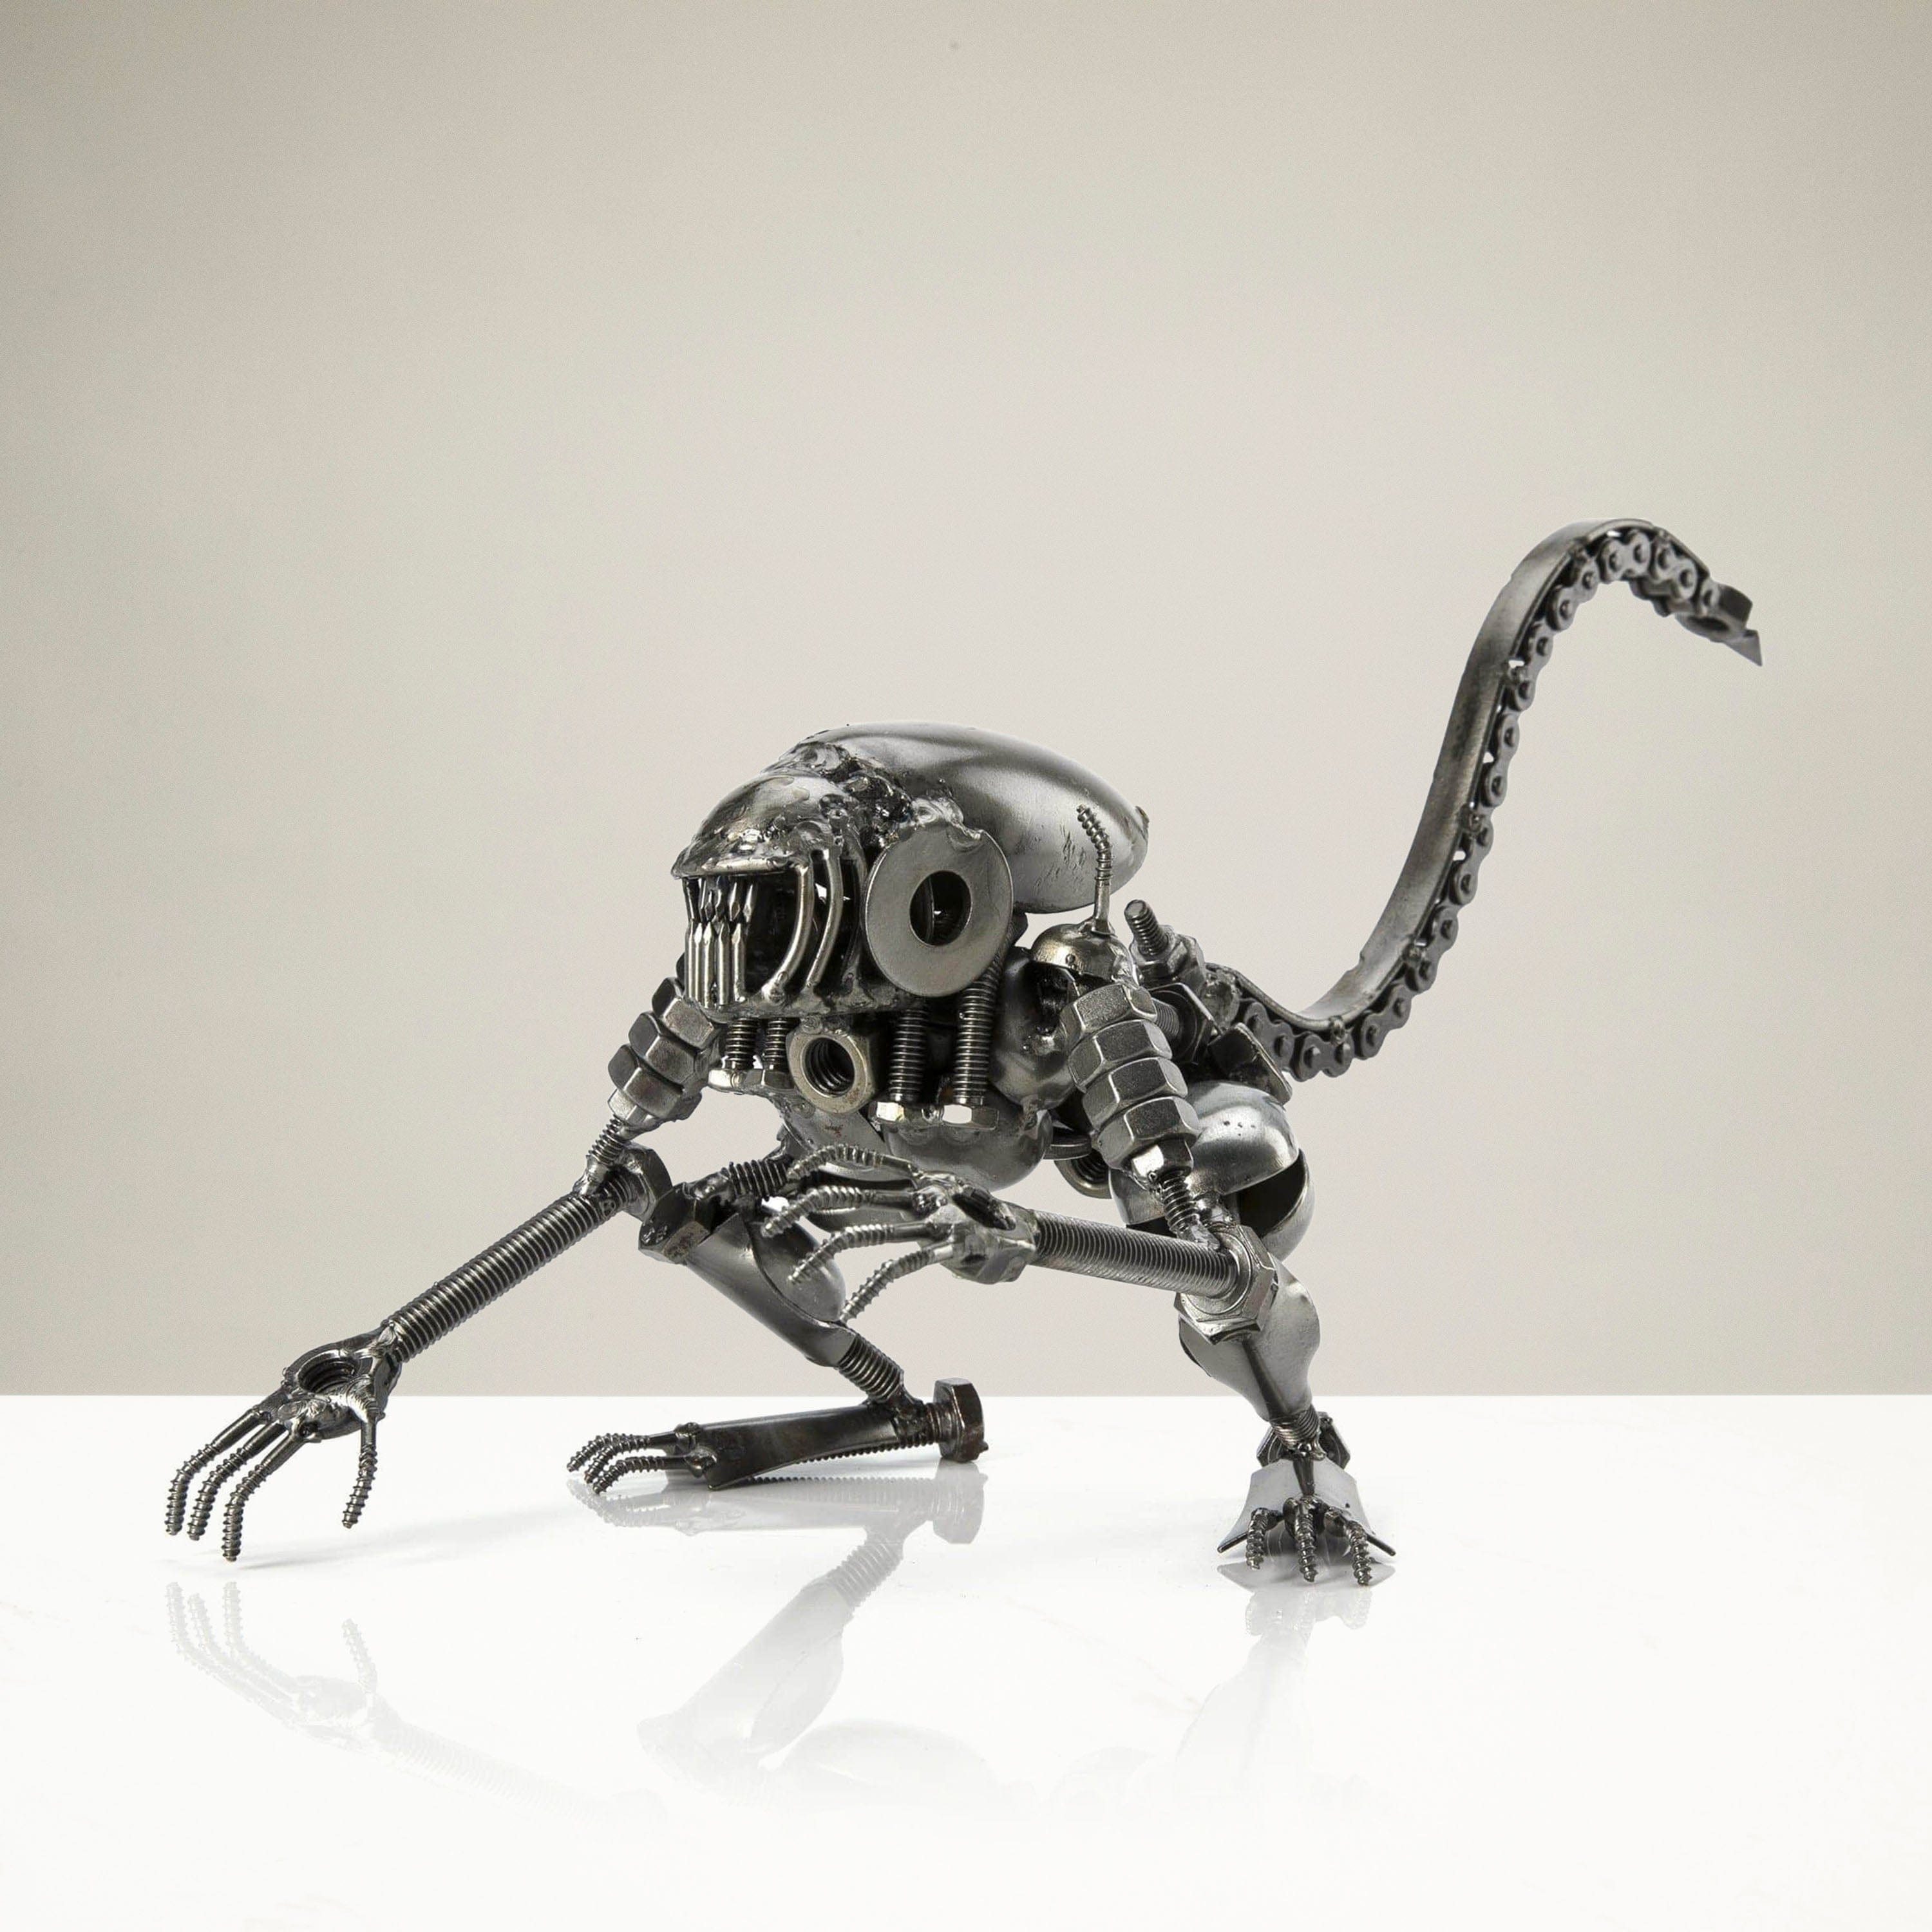 Kalifano Recycled Metal Art Alien Crouched Inspired Recycled Metal Sculpture RMS-700AA-N